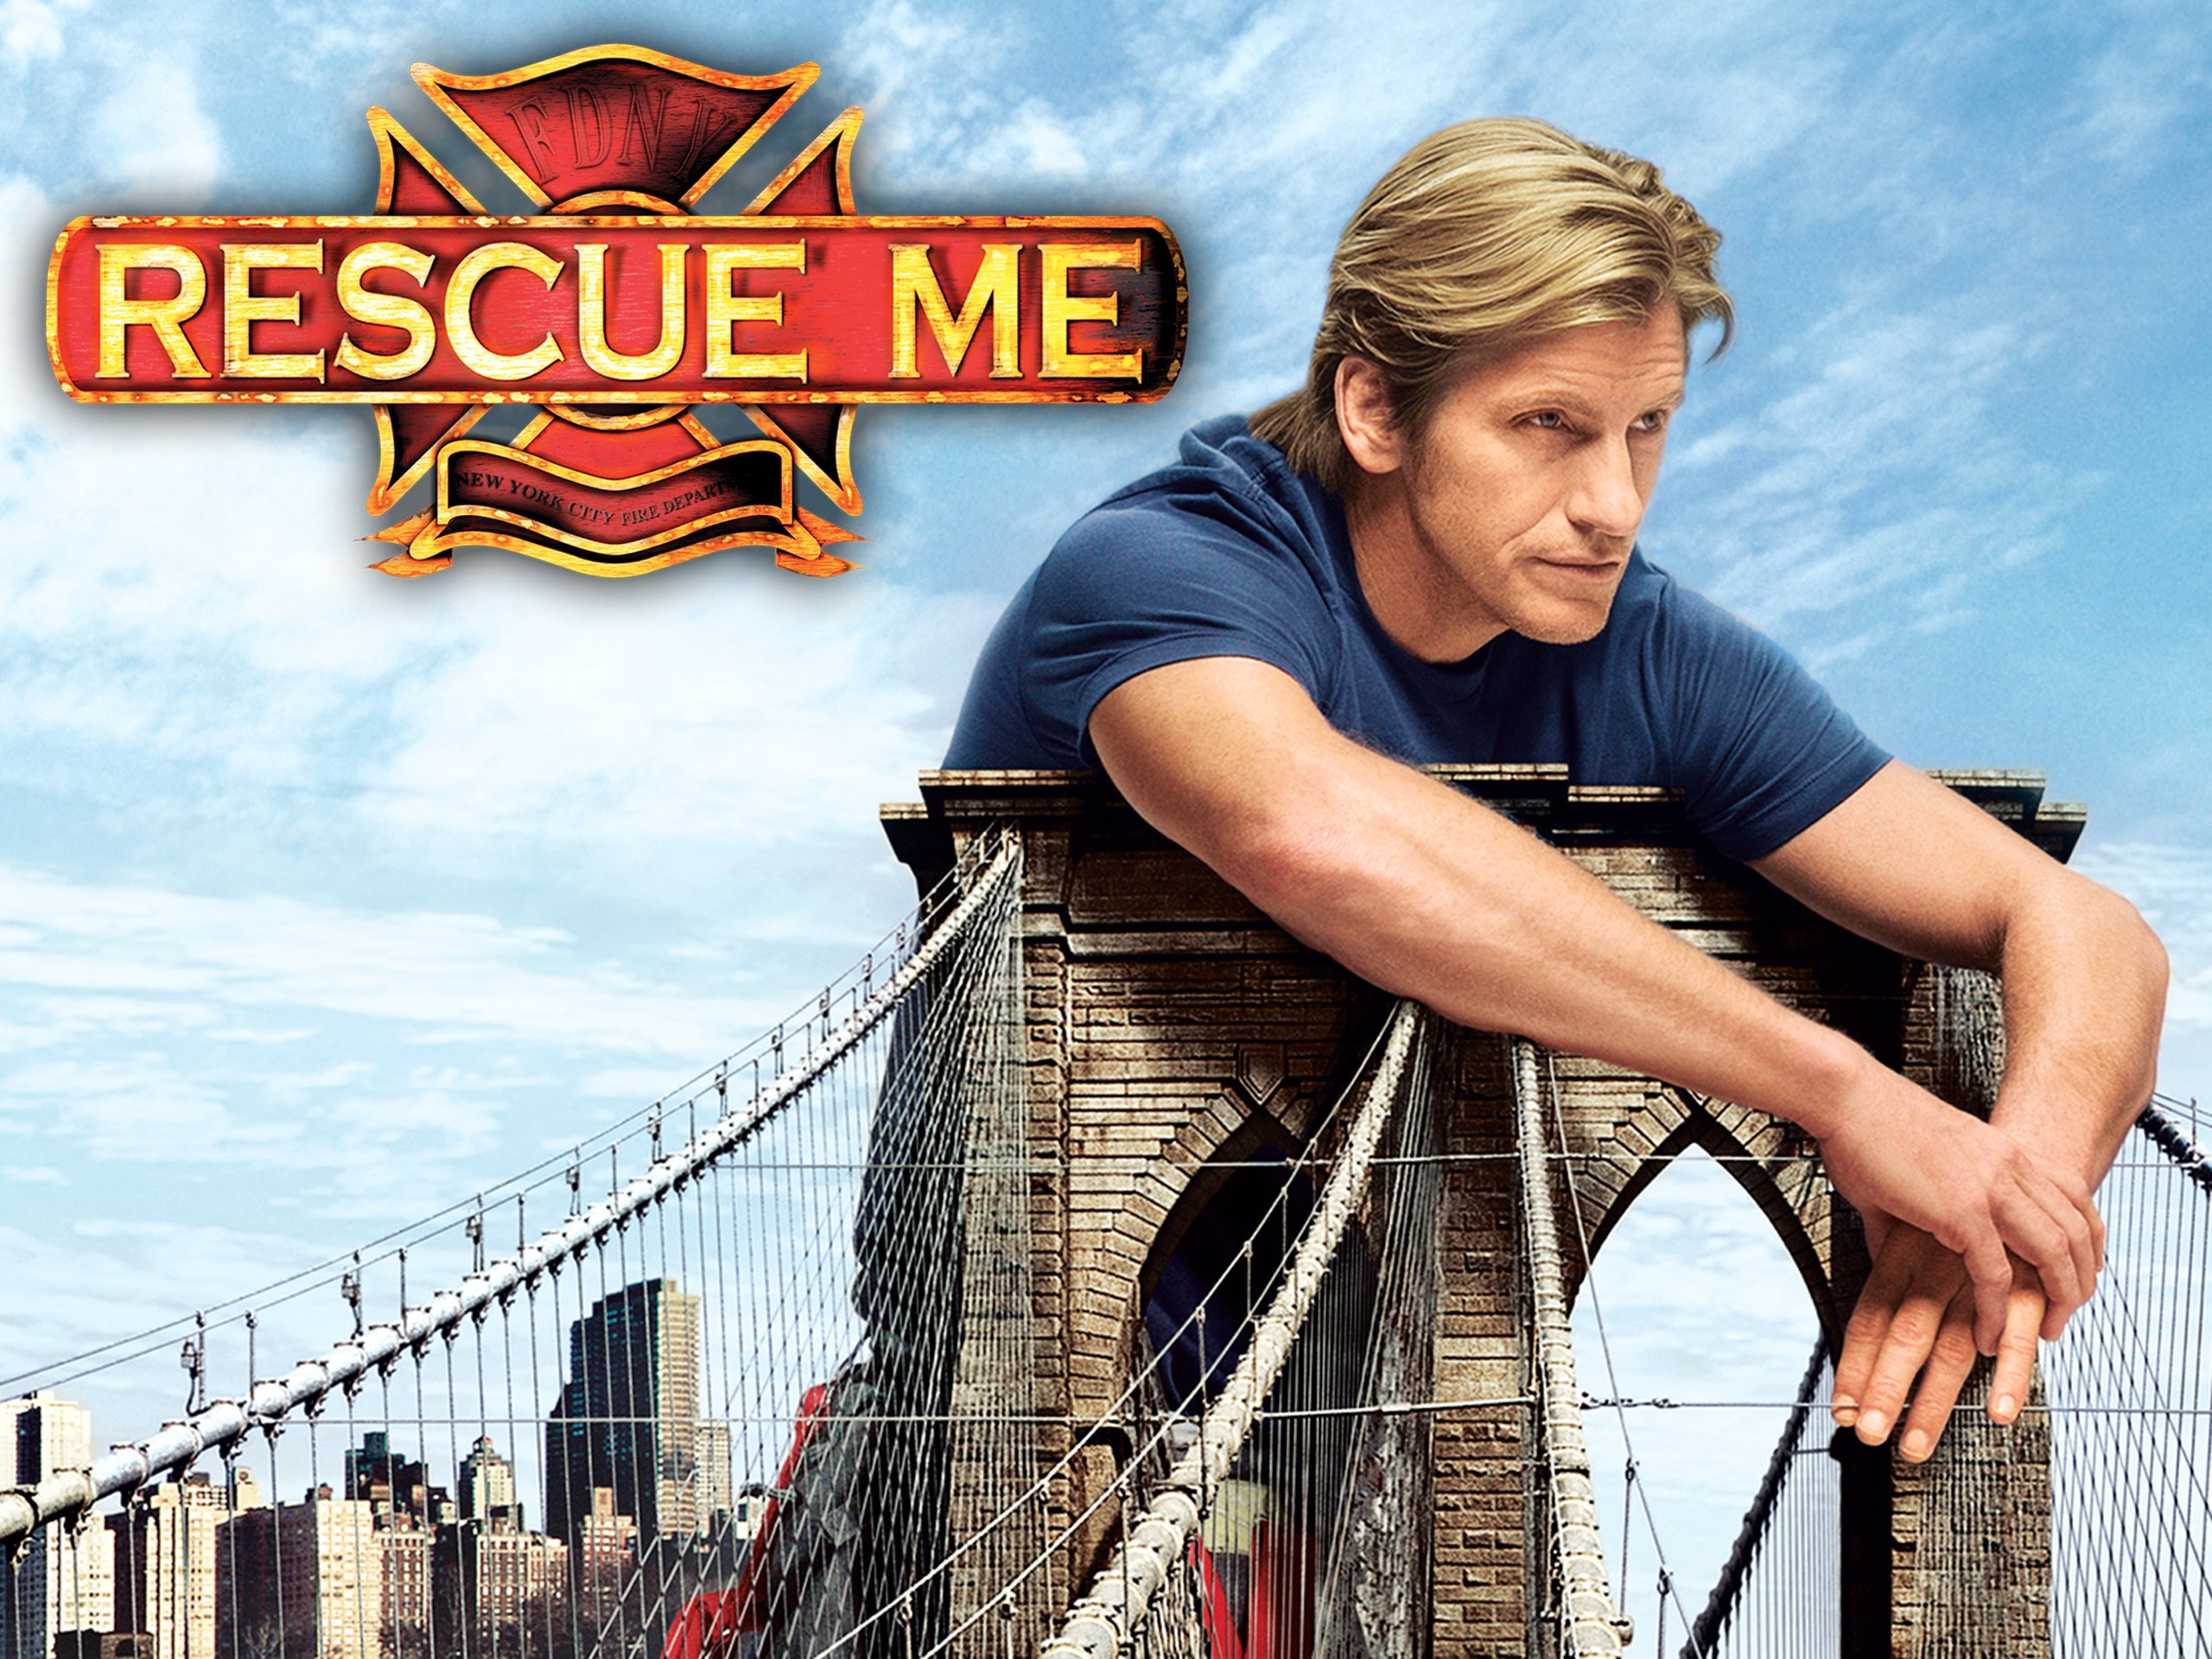 https://static.wikia.nocookie.net/rescueme/images/a/a2/Rescue_Me_Season_5_banner.jpg/revision/latest?cb=20200706082707